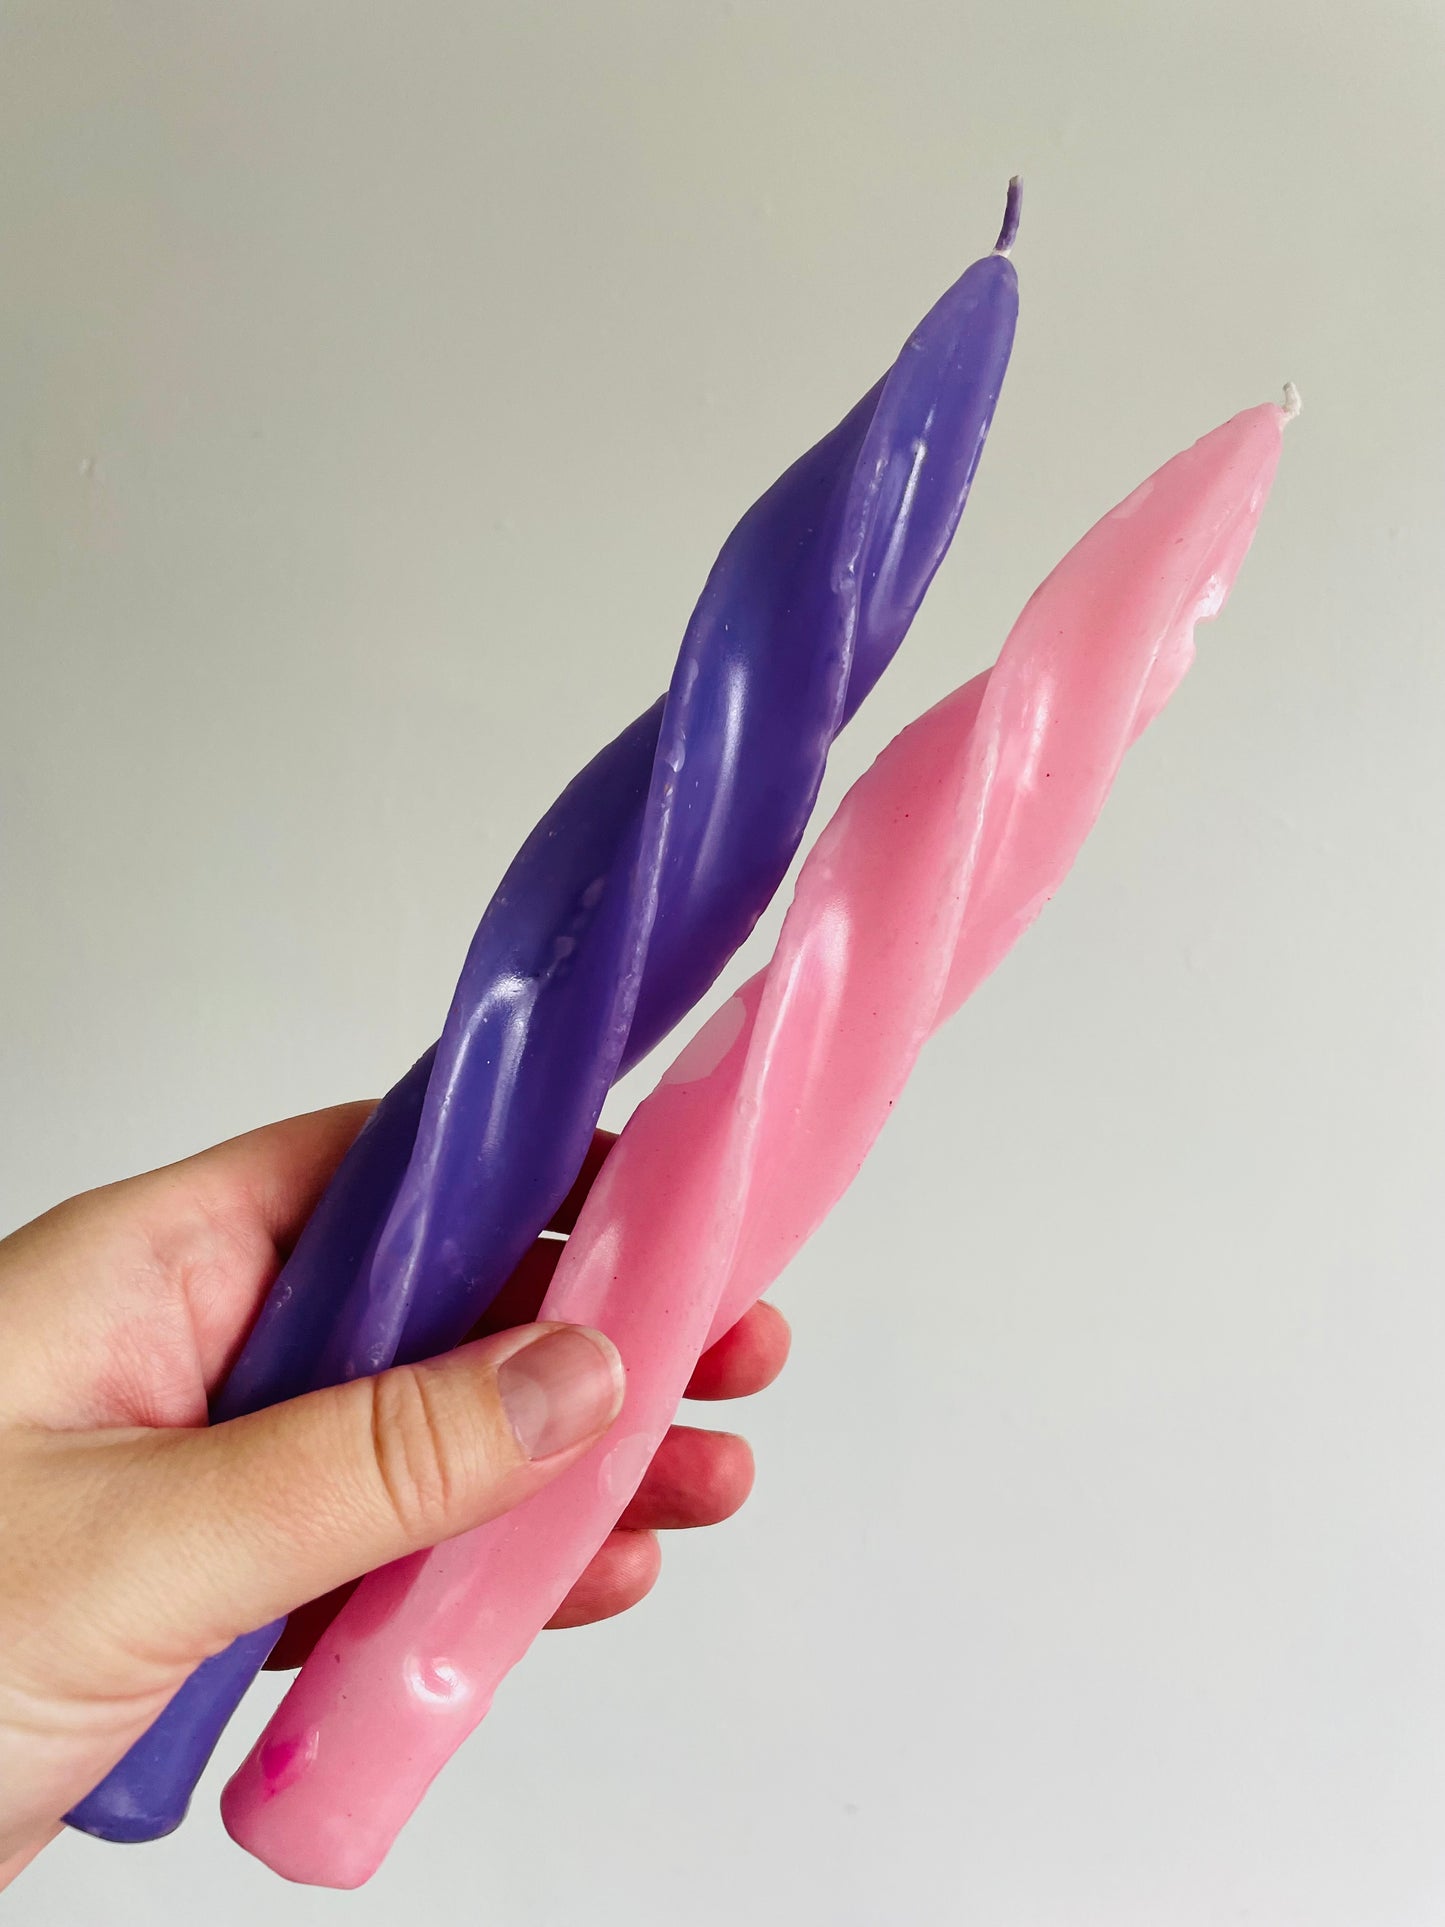 Pink & Purple Candle Bundle - Twist Tapers & Northern Lights Wee Wizard Collection Candle - Wellsville New York Handcrafted in the USA